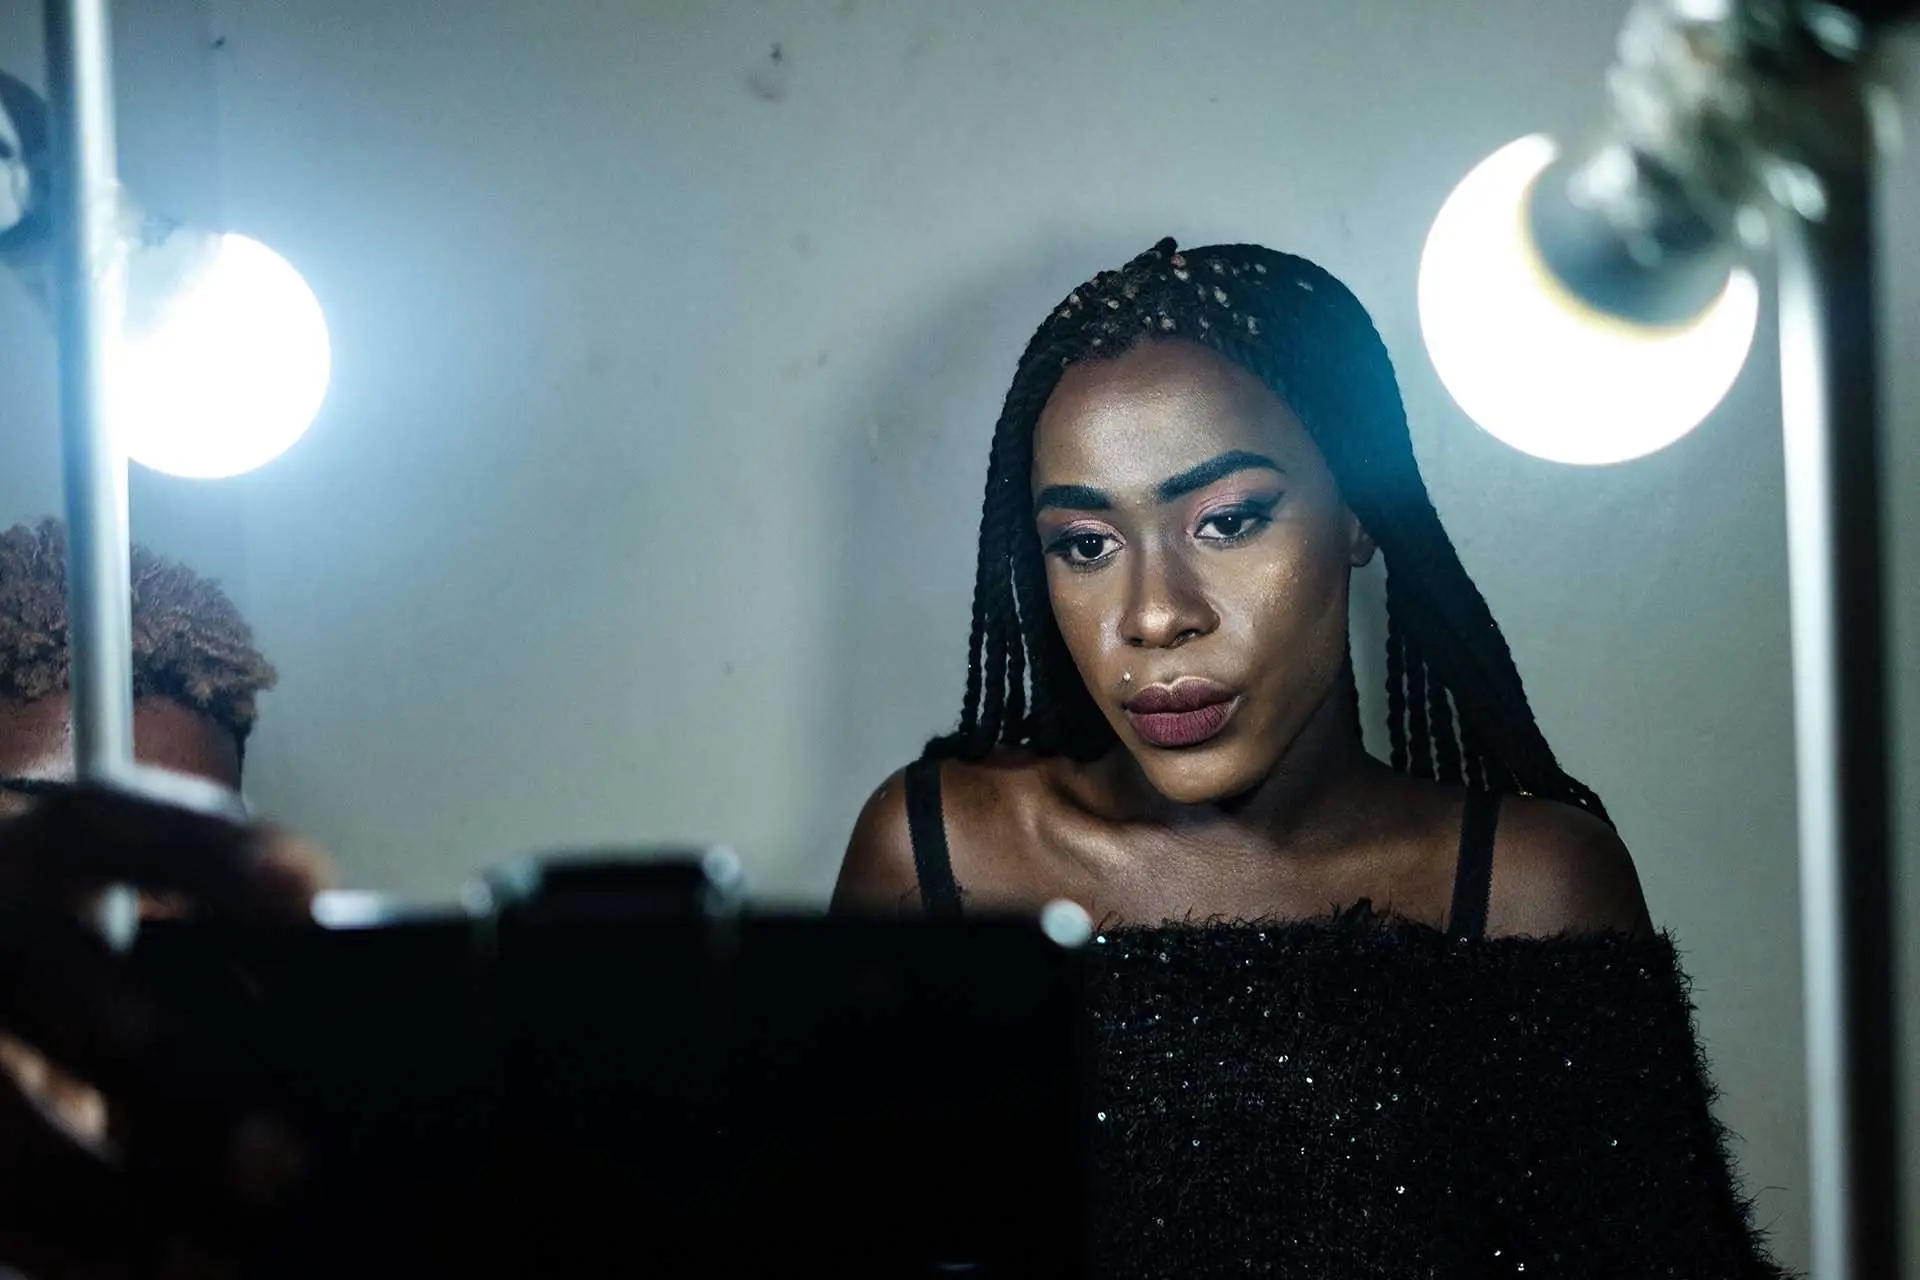 A Black woman in a glittery black top sits in front of a camera and lightbulbs, a blank wall behind her.